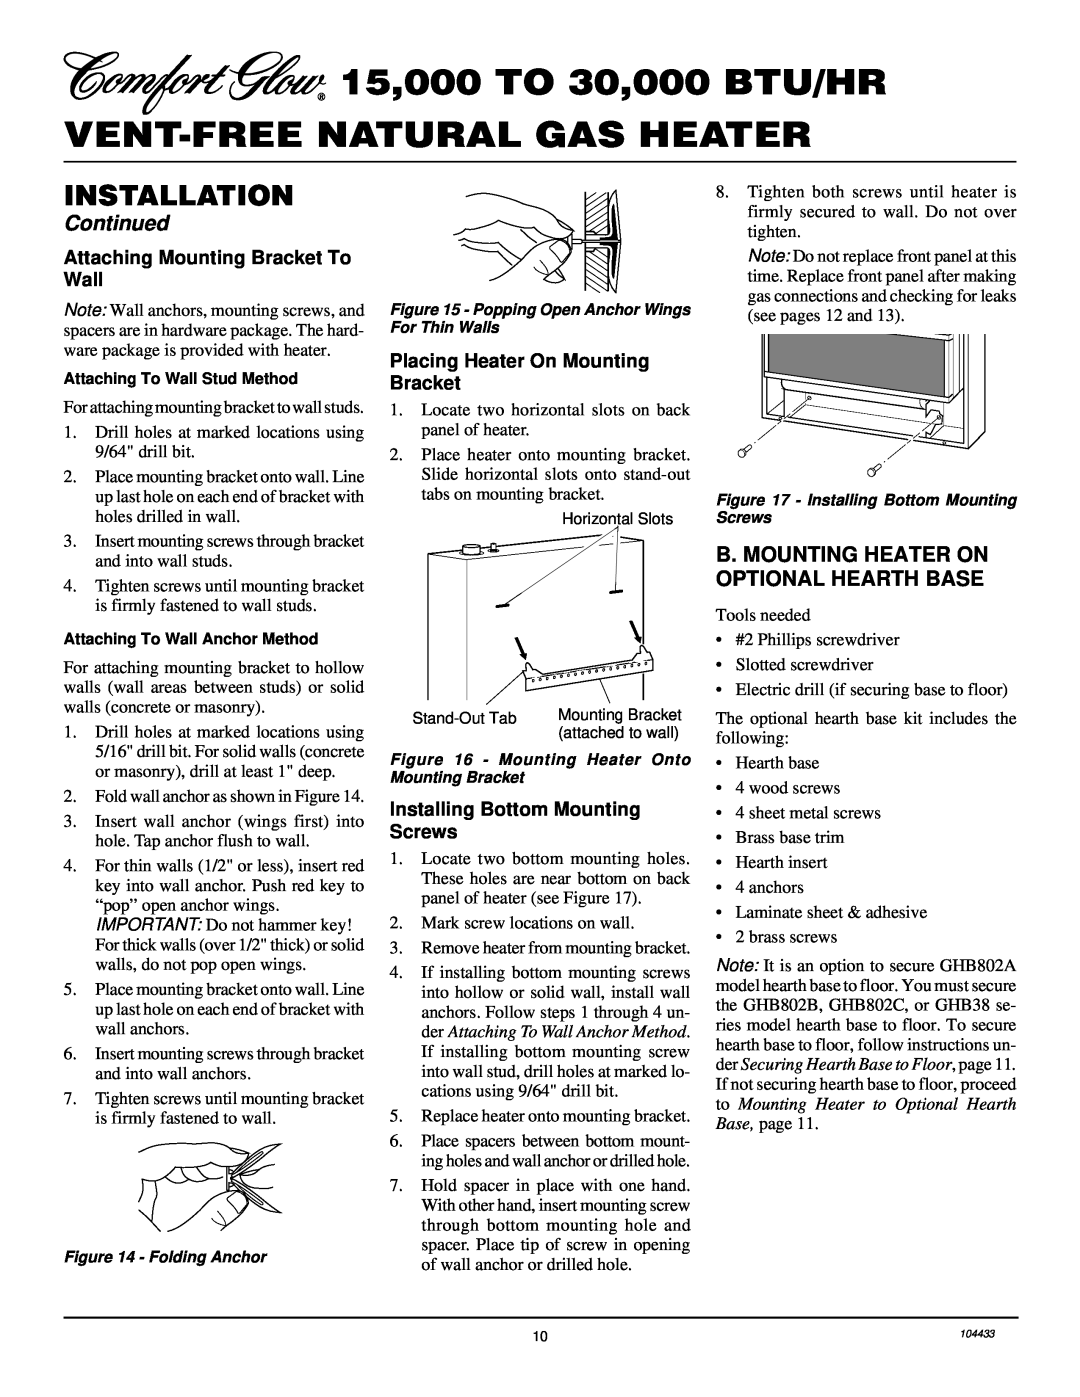 Desa RFN30T B. Mounting Heater On Optional Hearth Base, Attaching Mounting Bracket To Wall, Installation, Continued 